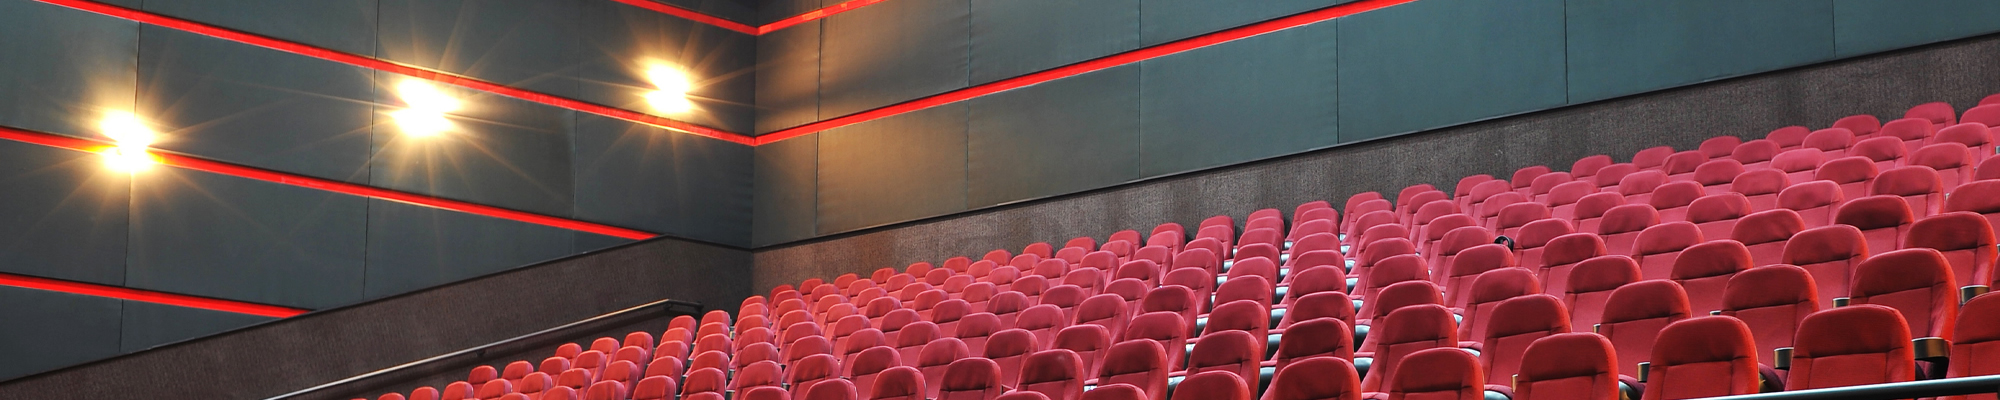 Cinemas and theatres acoustic panels